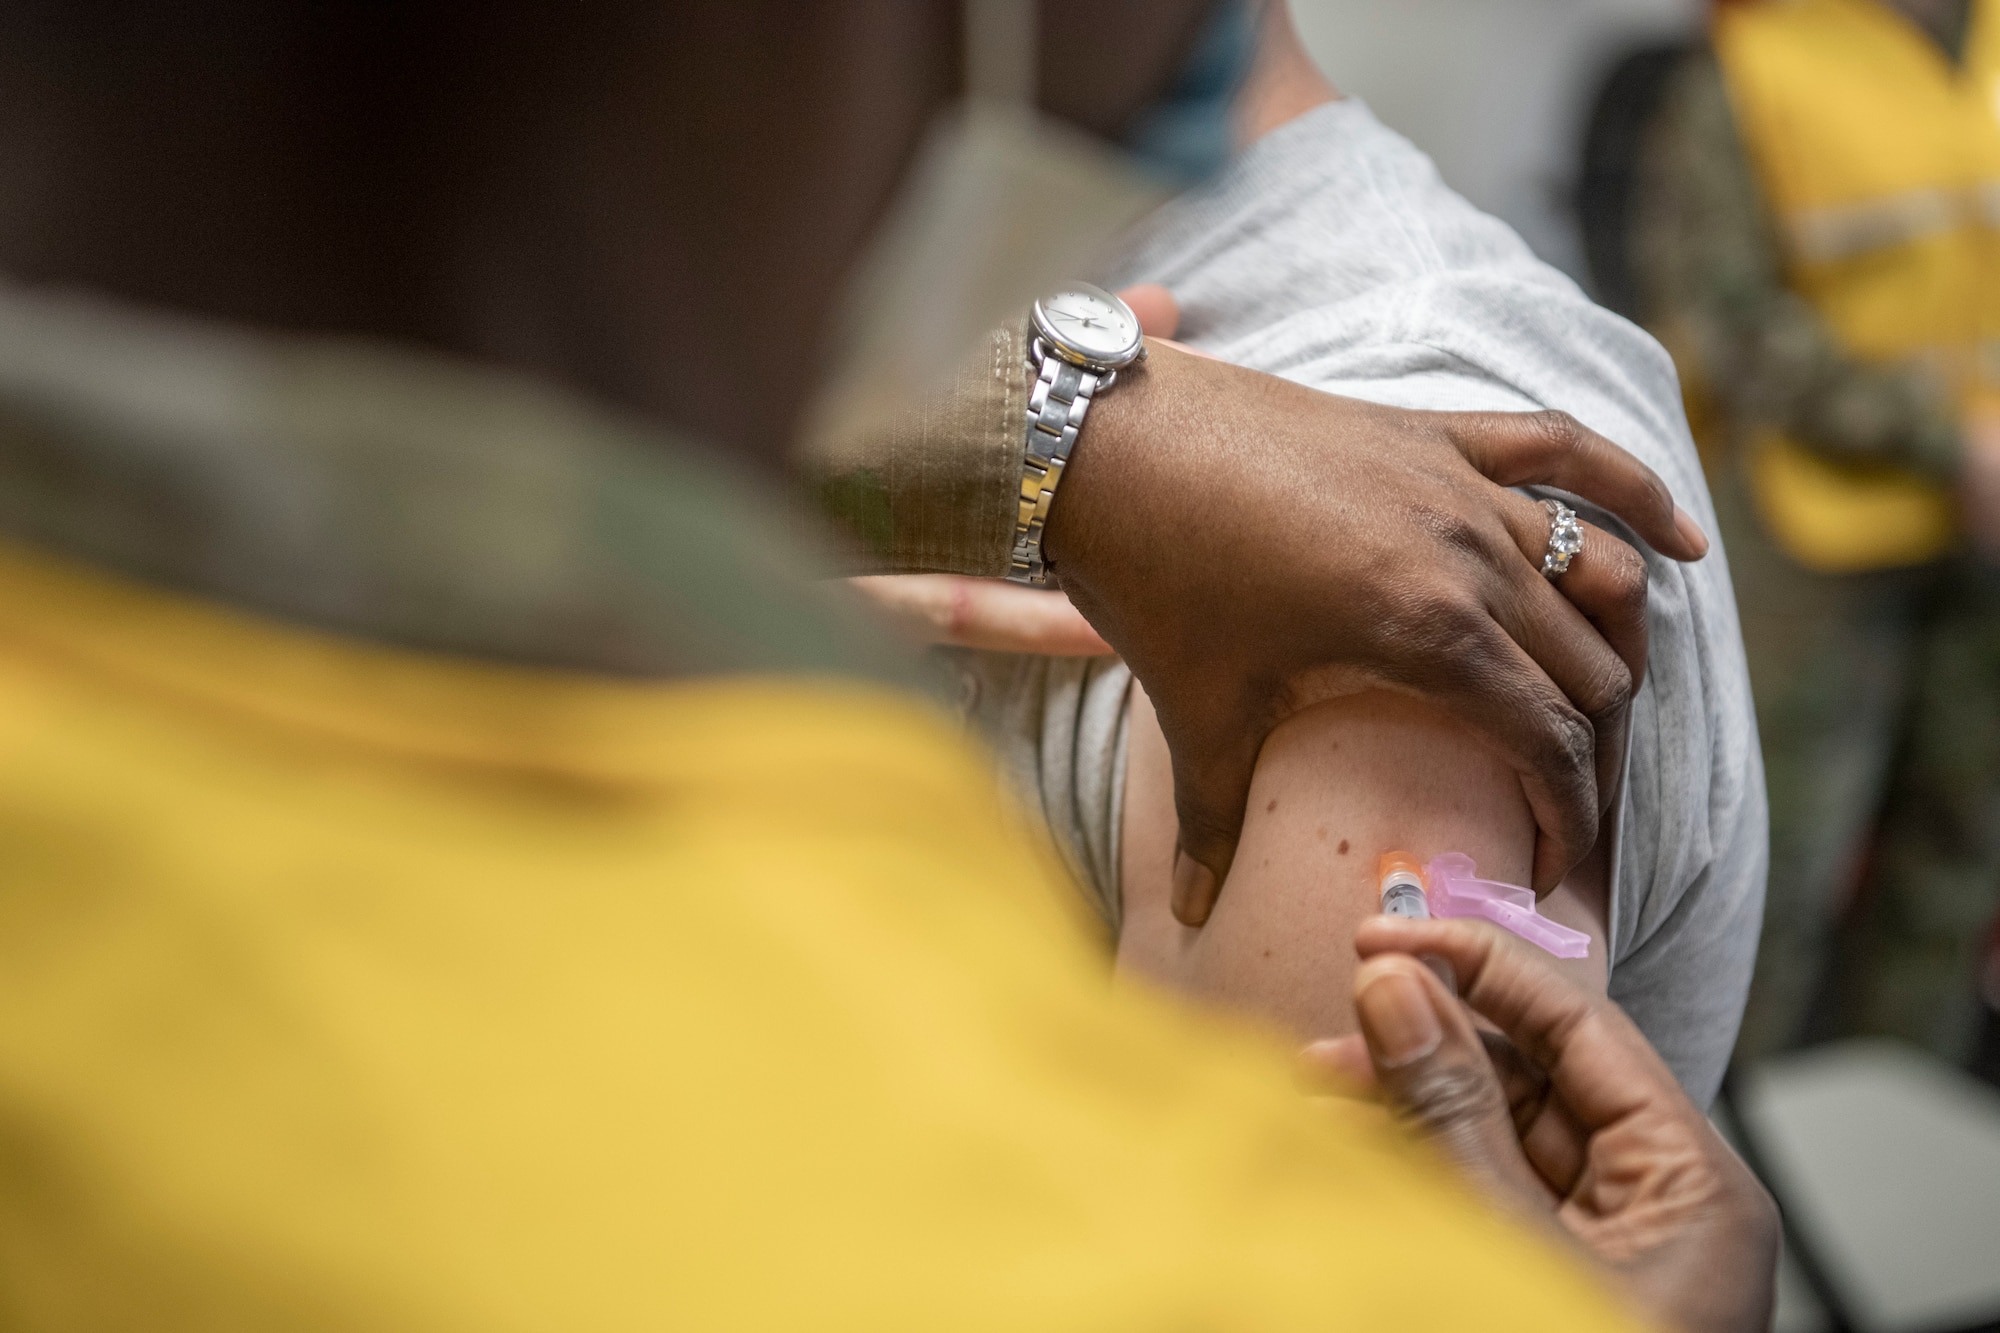 An Airman receives a COVID-19 vaccine in the left arm.